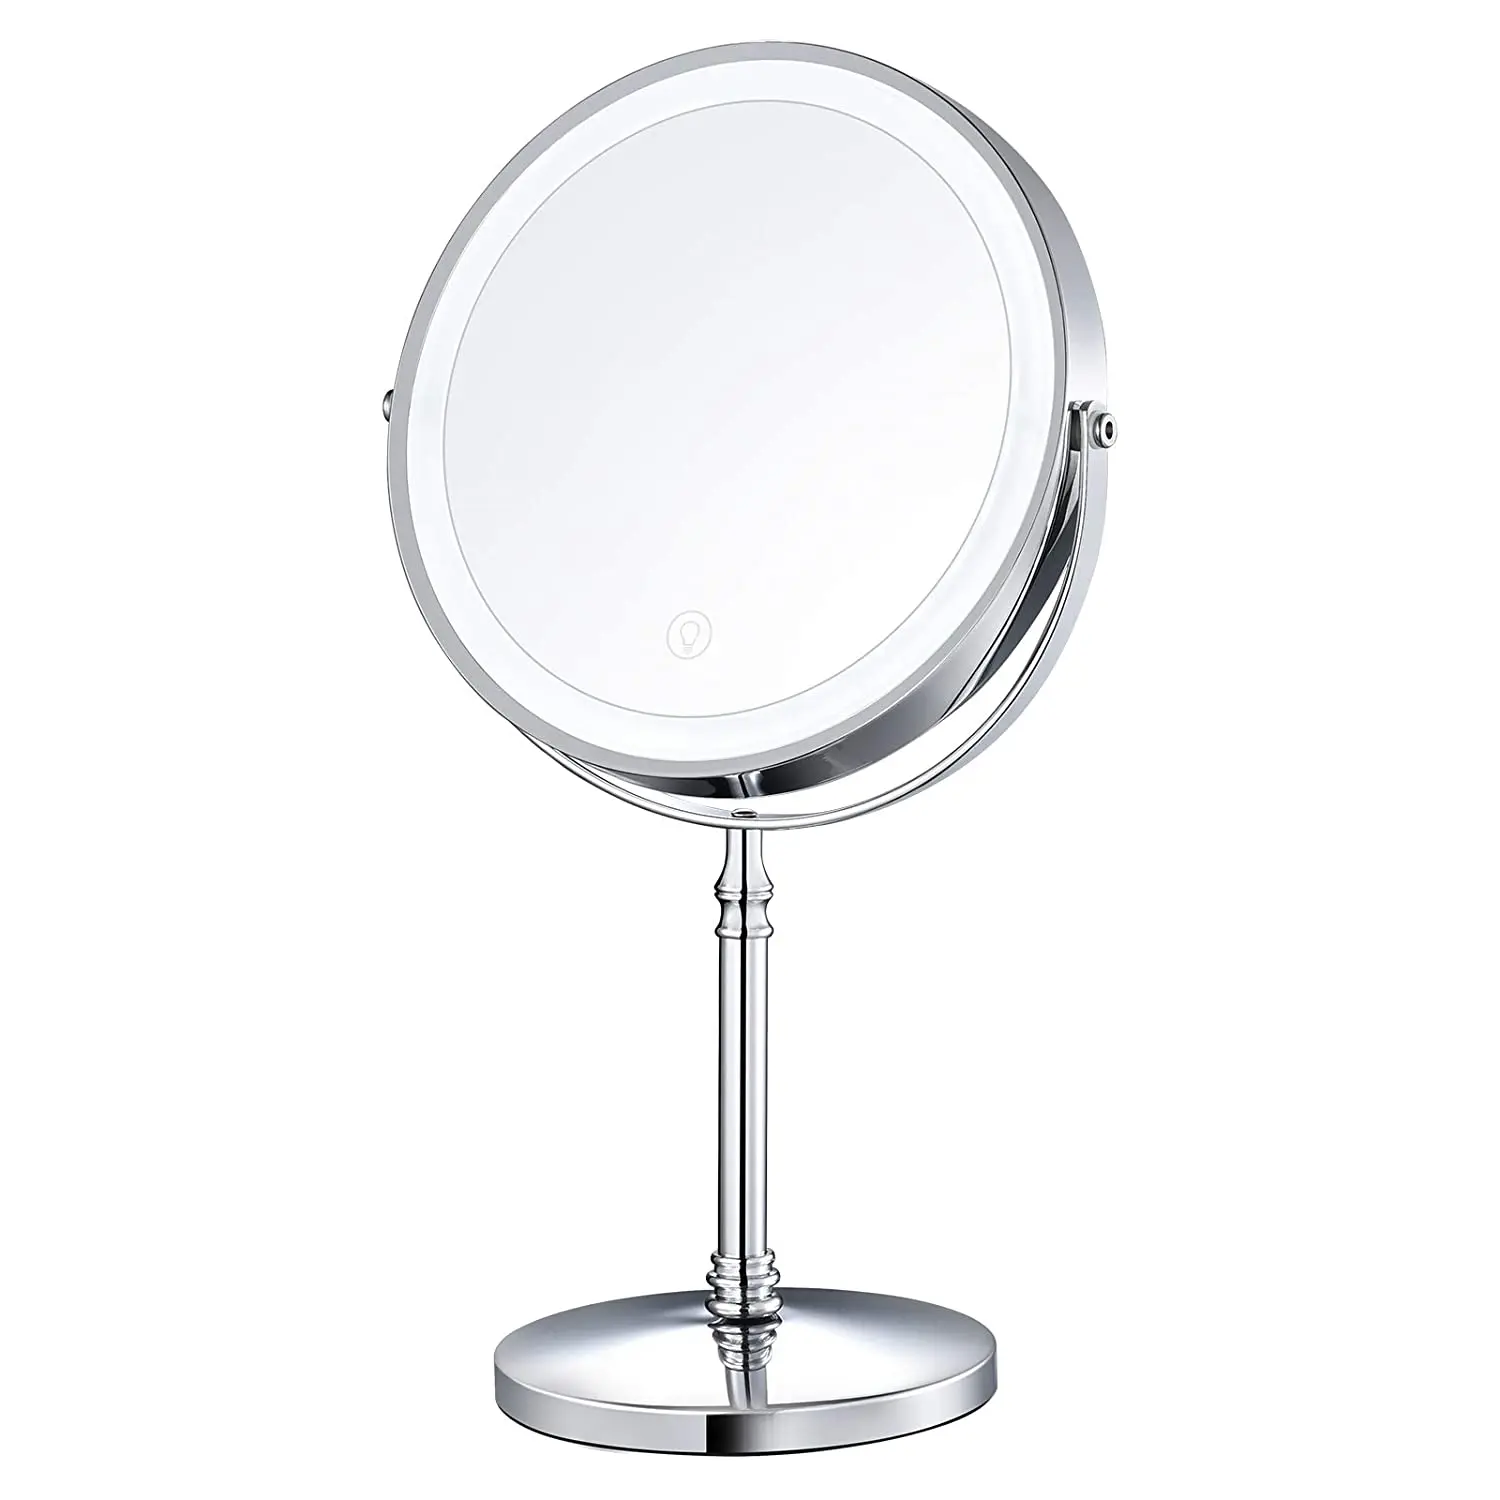 

2021 New 1x/10x Magnification Makeup Mirrors Led Round Table Desk Beauty Vanity Make Up Mirror Led Makeup Mirror With Light